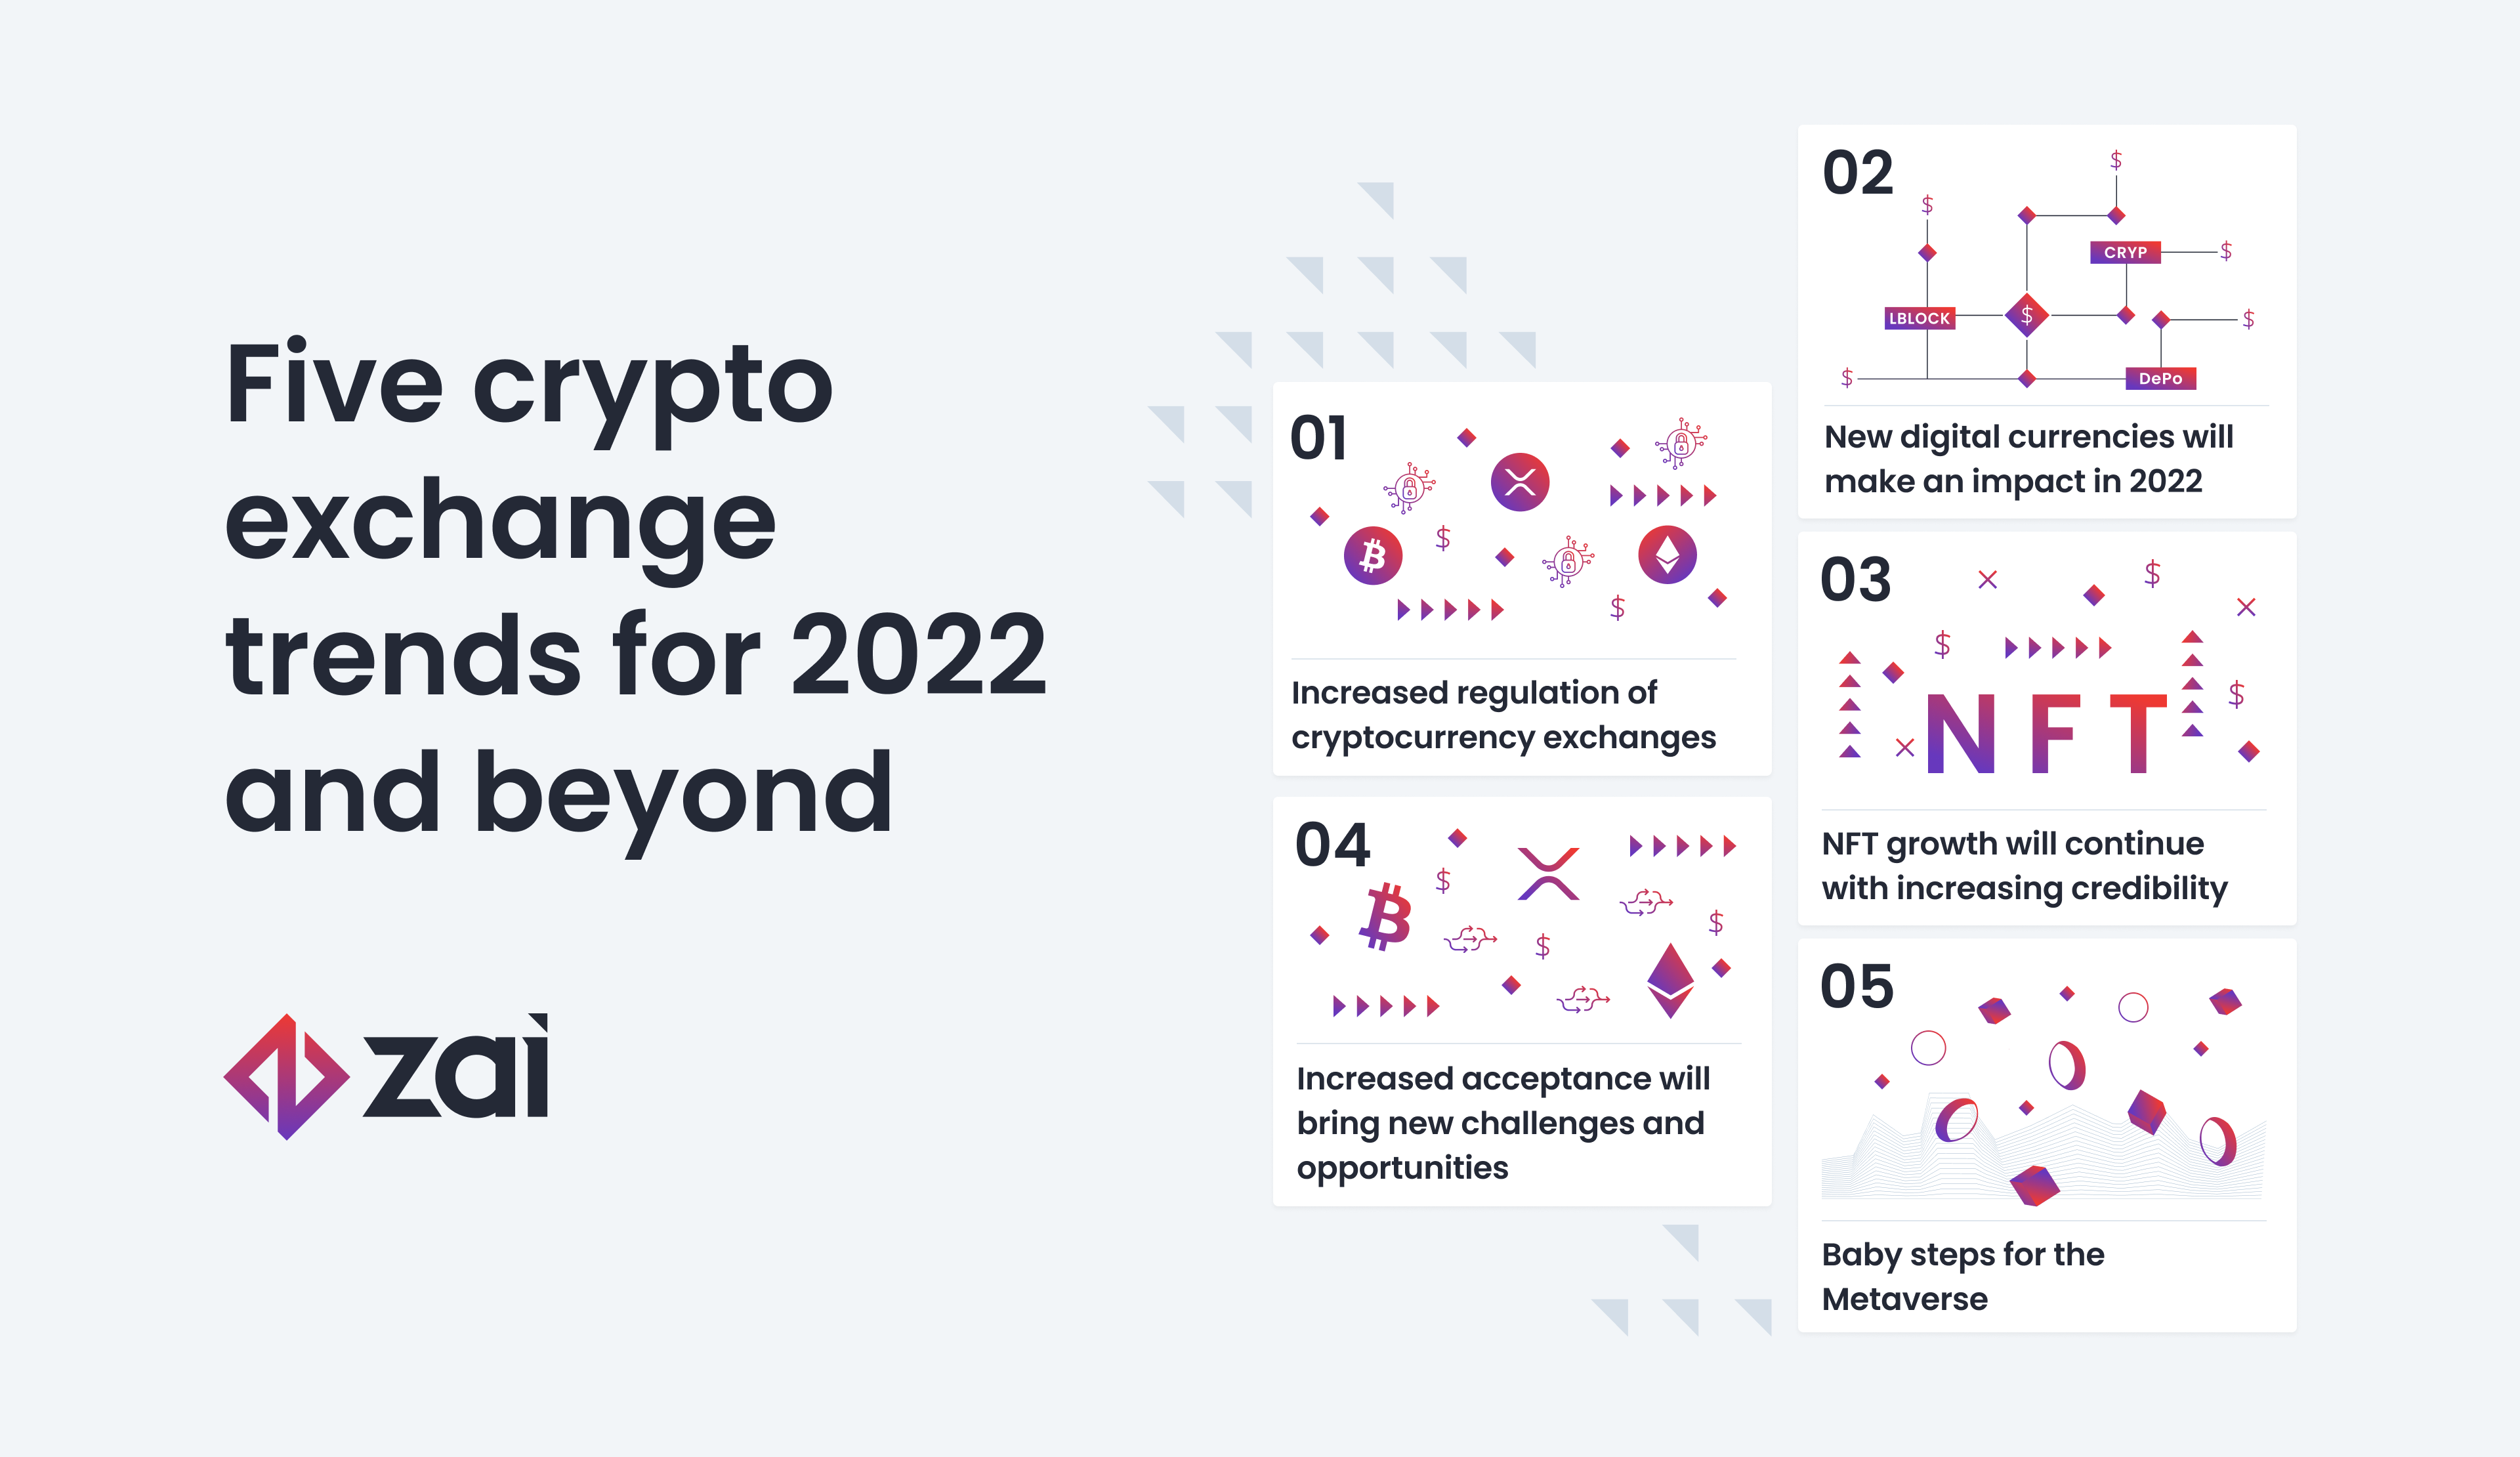 Five crypto exchange trends for 2022 and beyond